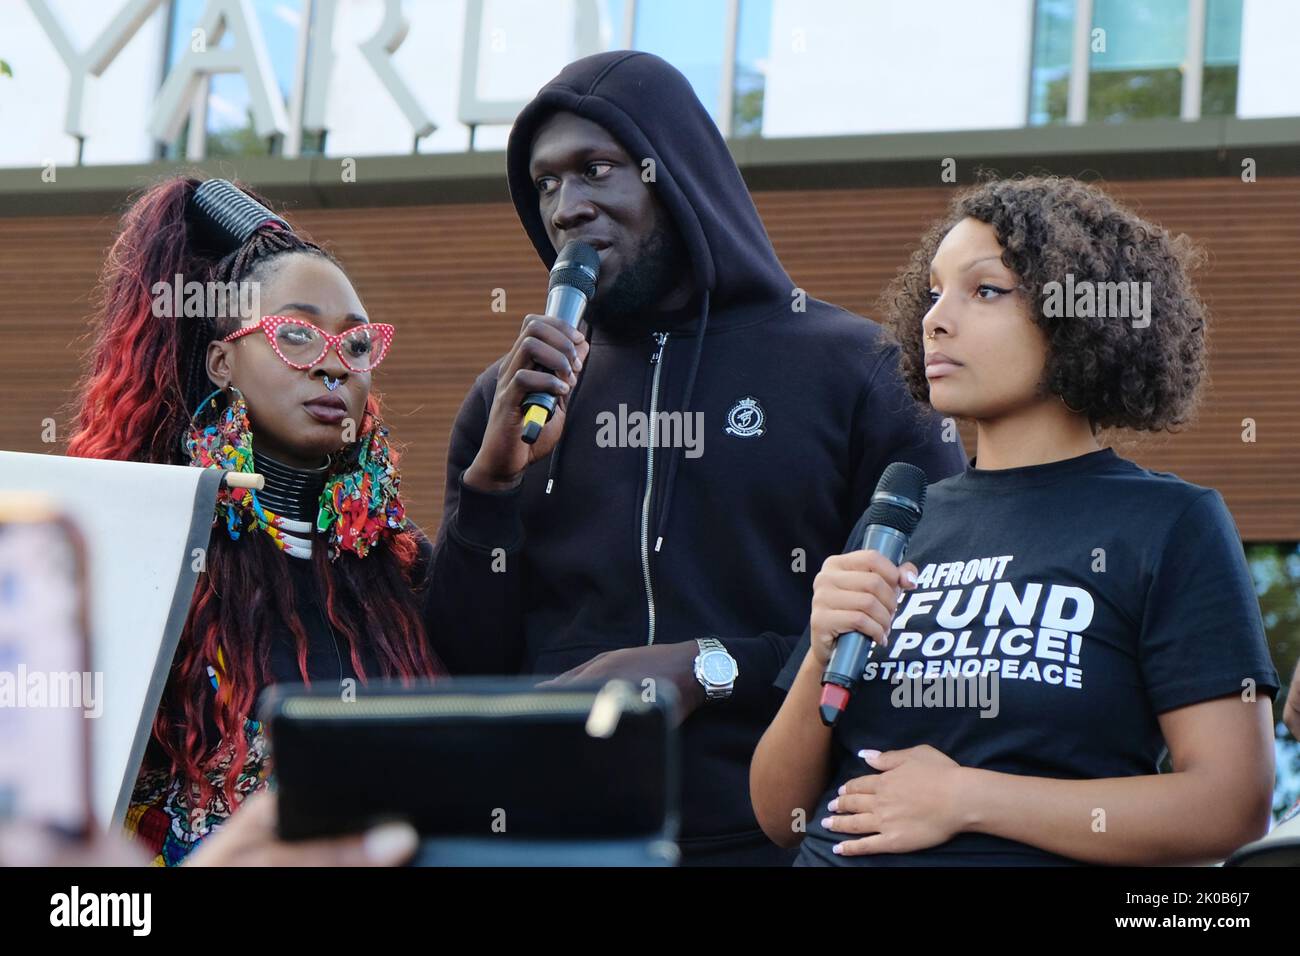 London, UK. 10th September, 2022. Singer Stormzy addresses hundreds of Black Lives Matters protesters outside New Scotland Yard. The demonstrators marched from Parliament Square to the police HQ calling for justice following a fatal shooting of father-to-be Chris Kaba, an unarmed black man, last Monday in sout London by police.  The IOPC are treating the investigation as homicide. Credit: Eleventh Hour Photography/Alamy Live News Stock Photo